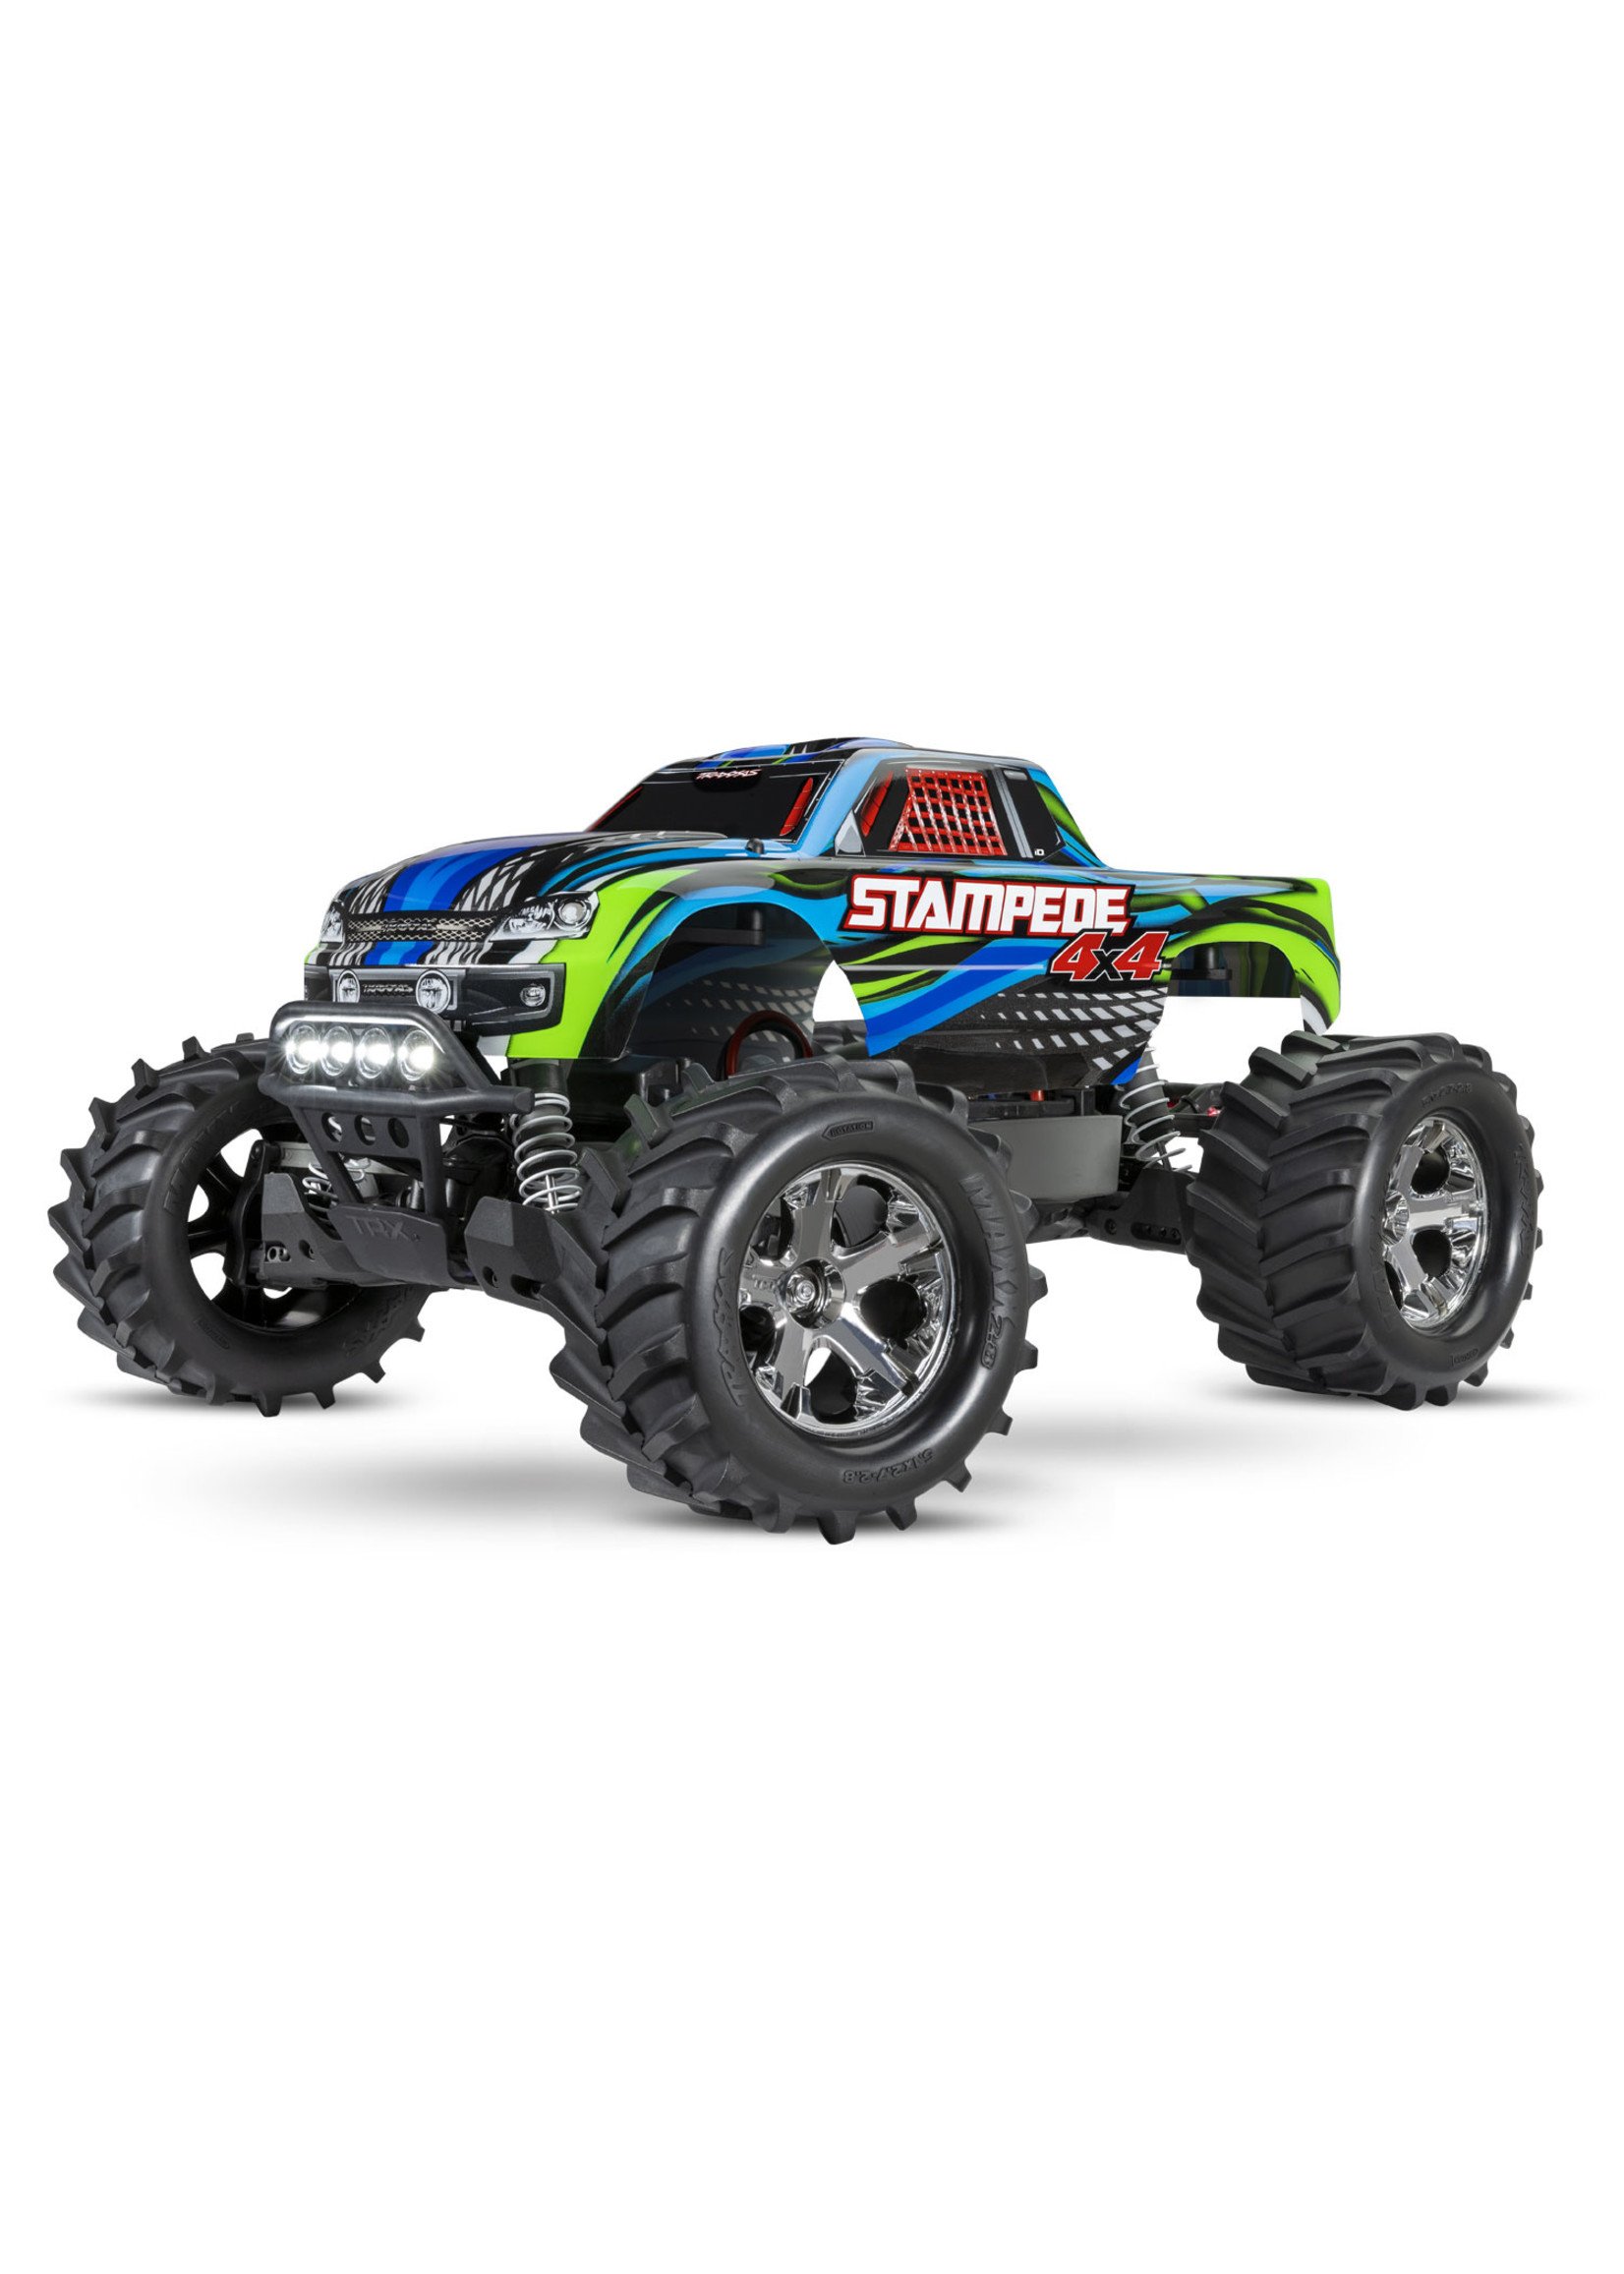 Traxxas 67054-61BLU - Stampede 4X4 With LED Lights - Blue/Green